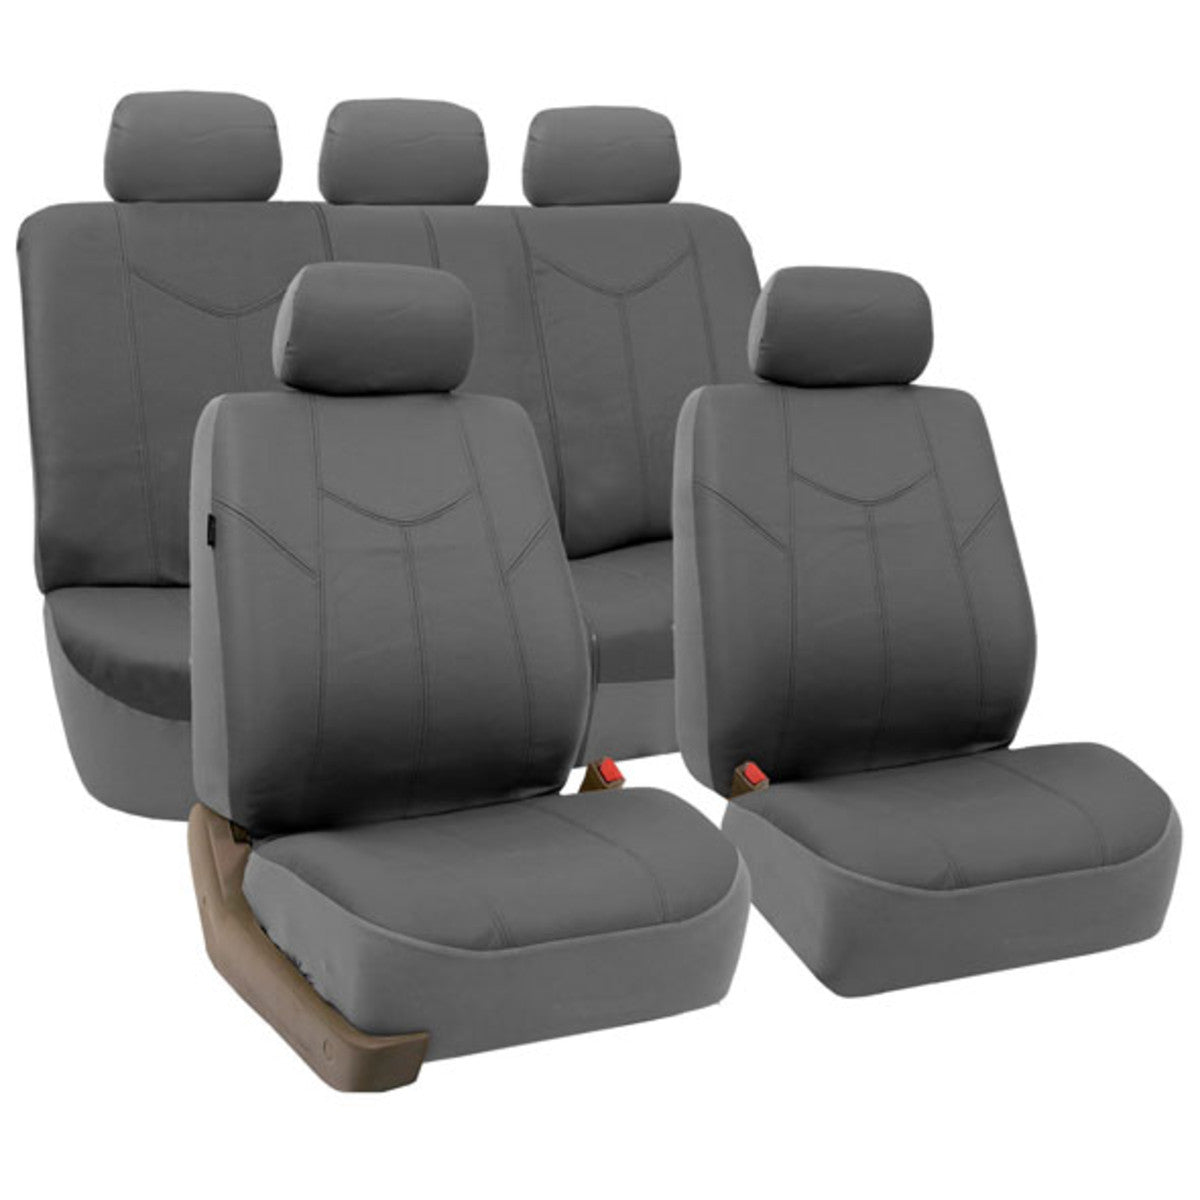 Rome PU Leather 3 Row Seat Covers Gray